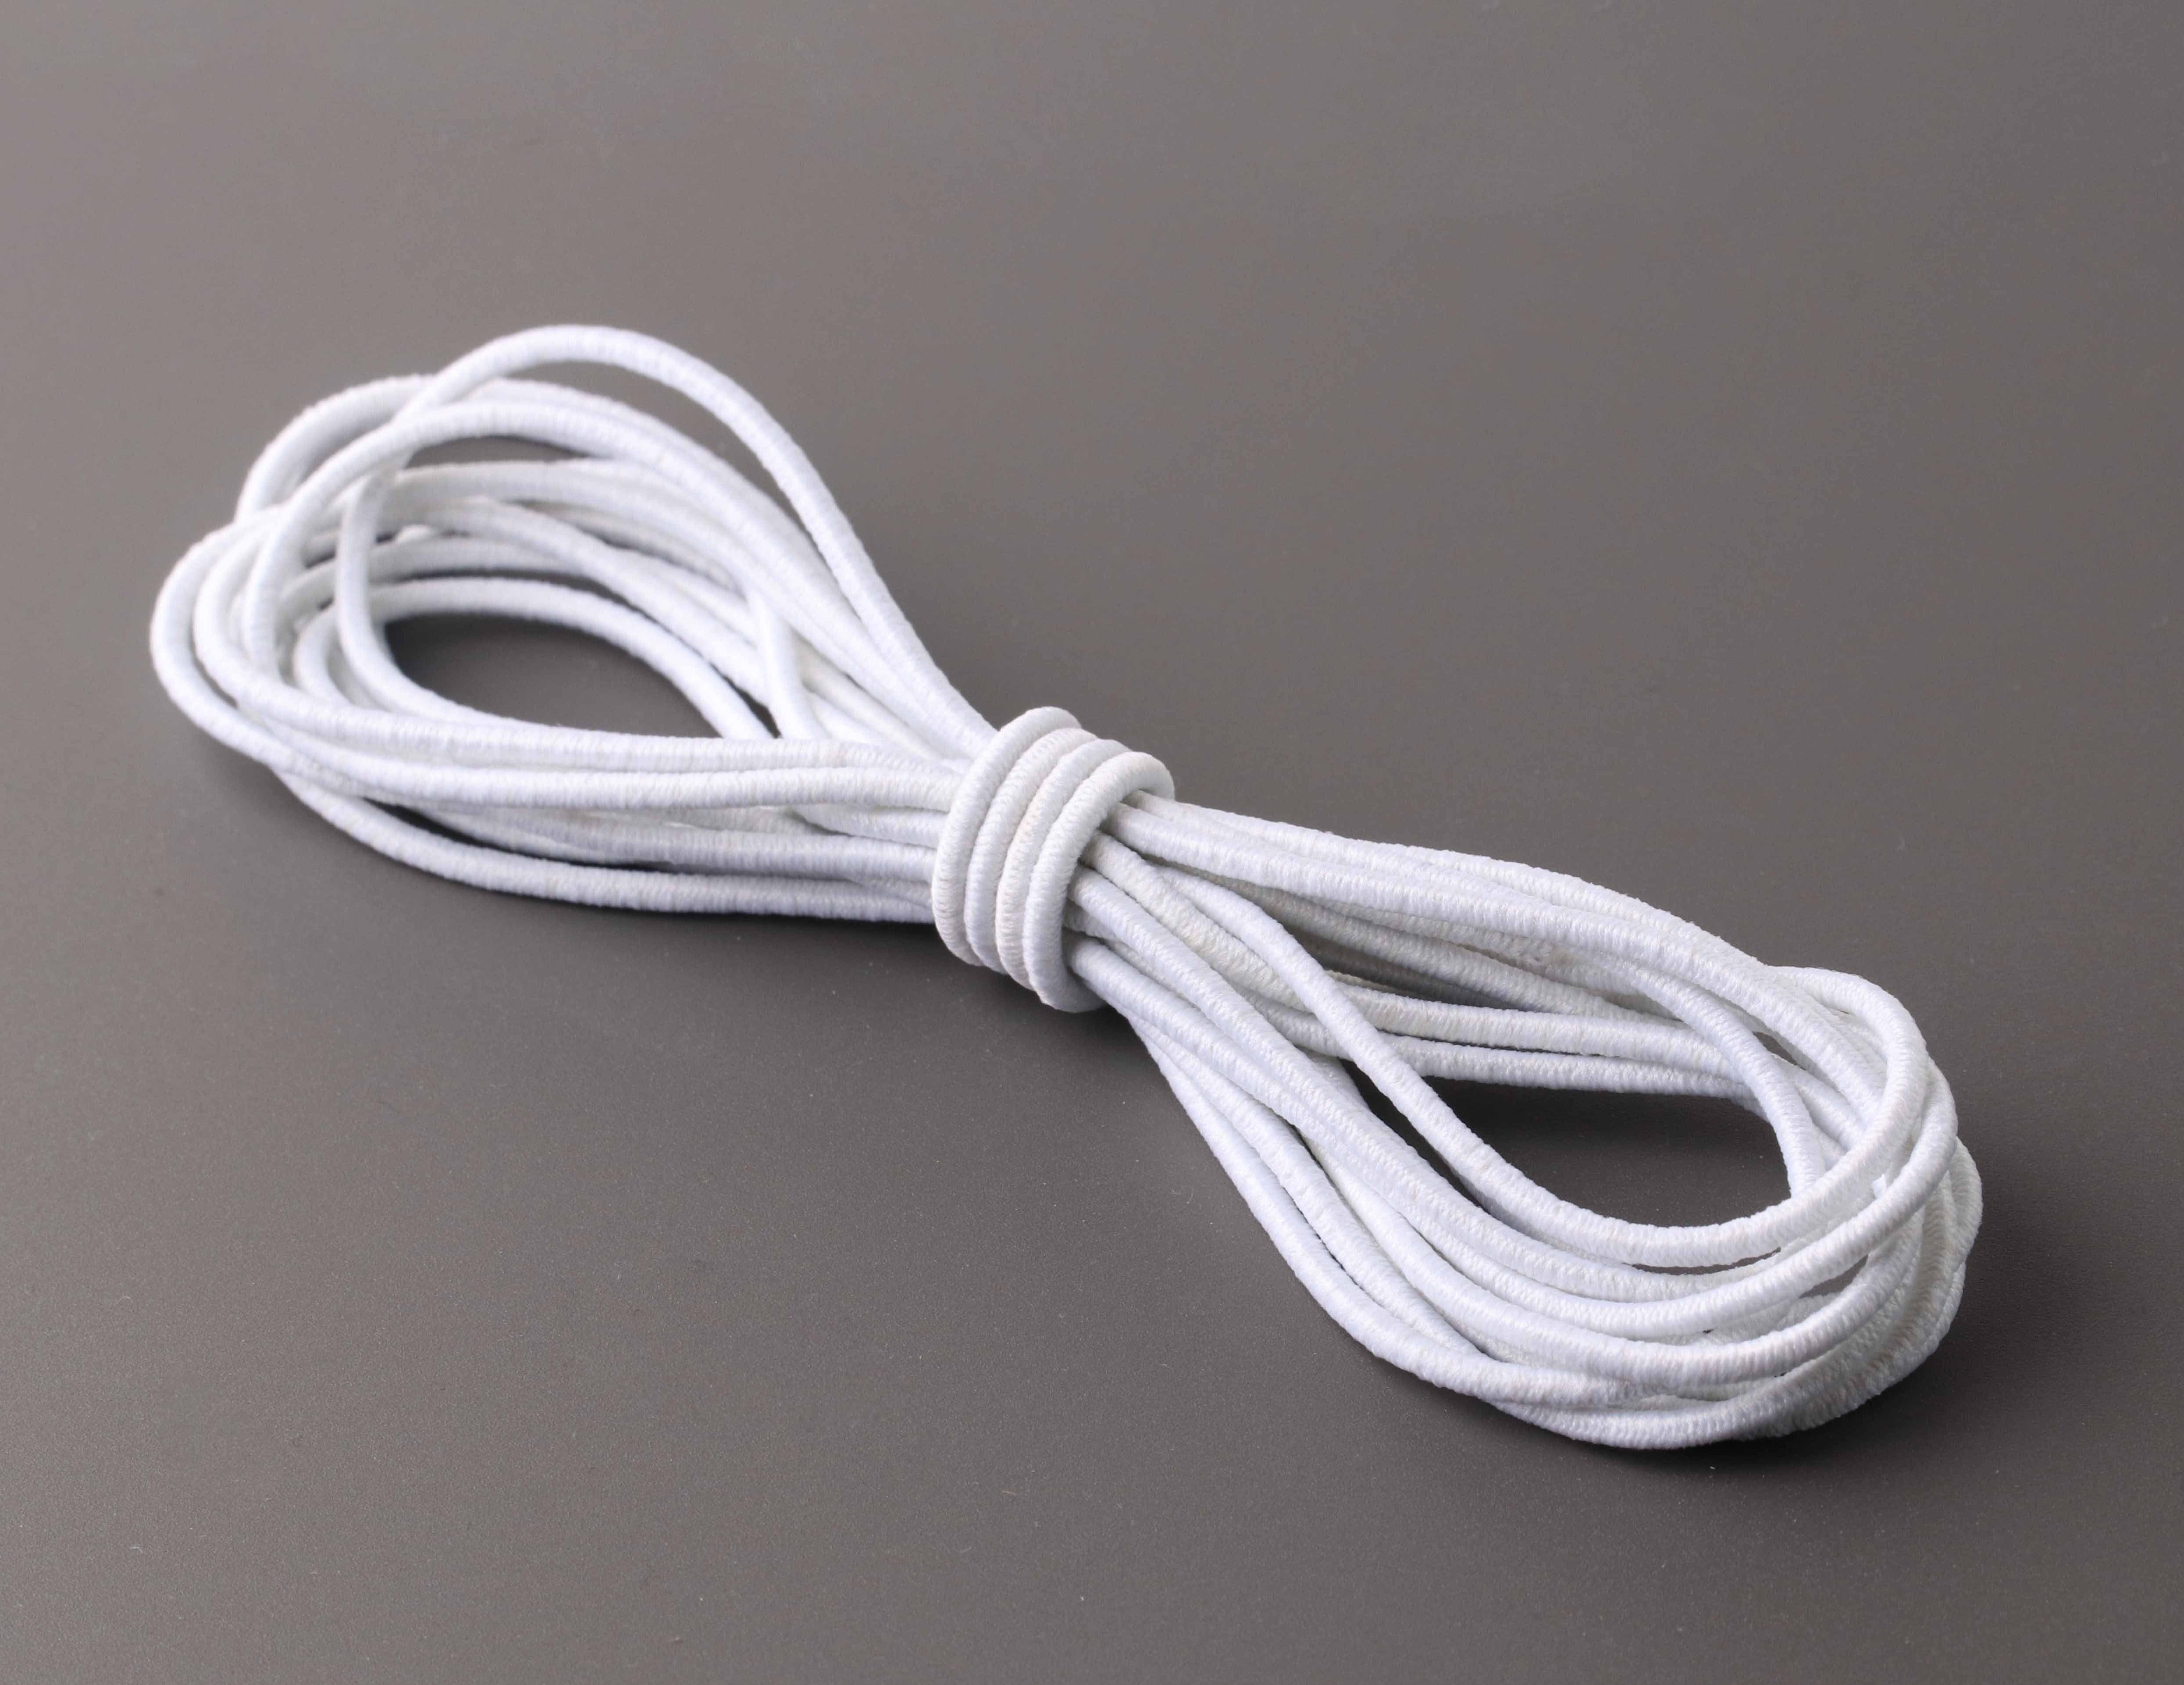 Wholesale] Polyester Elastic Cord 2mm (5/64) 50 Meters Roll